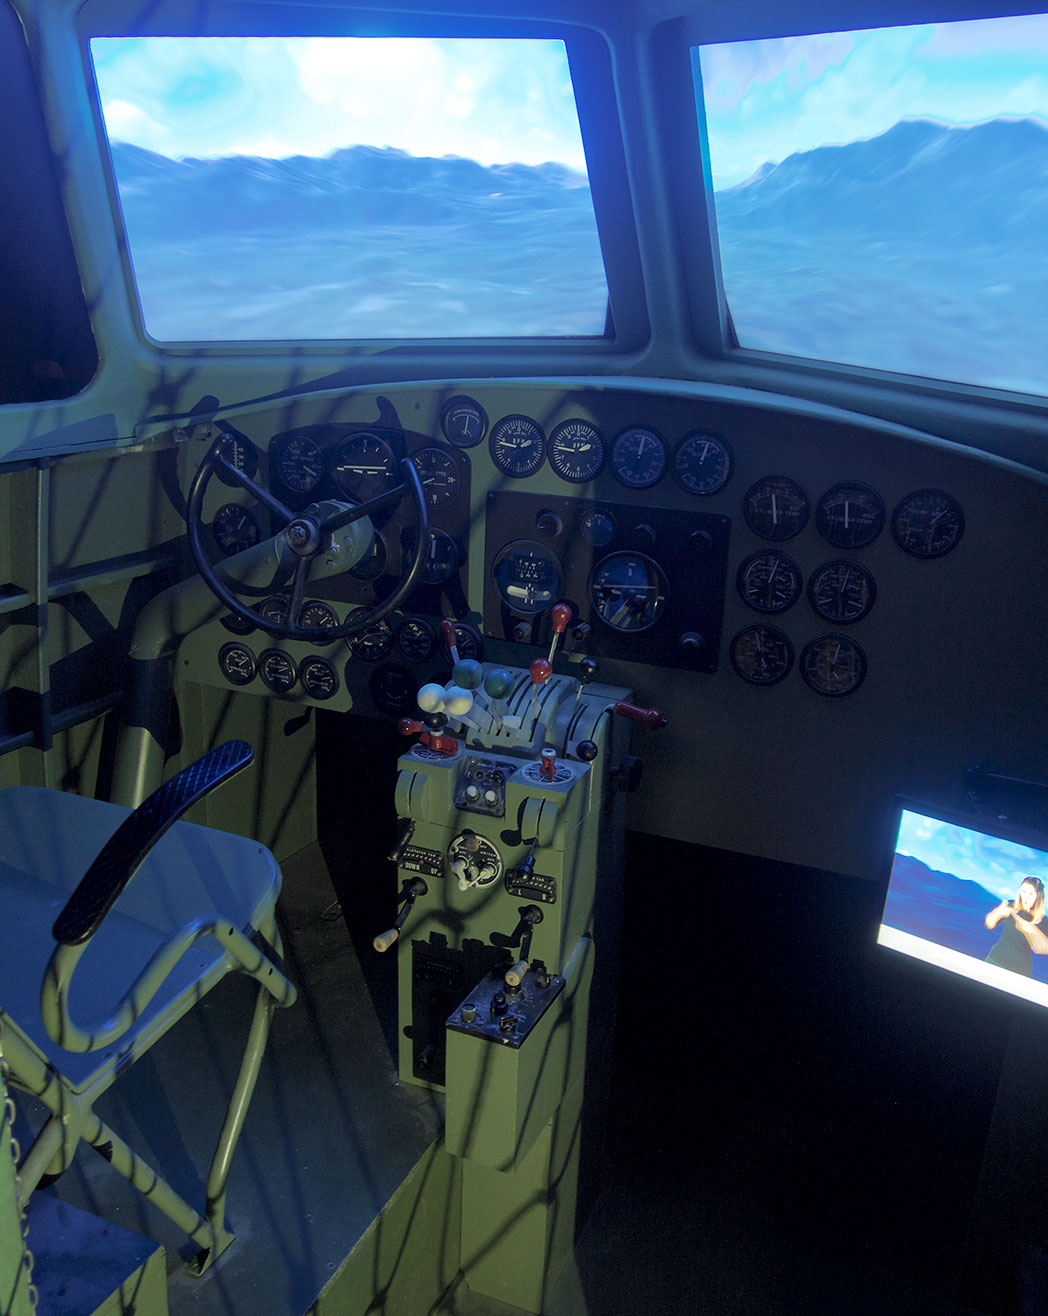 Immersion in a cockpit